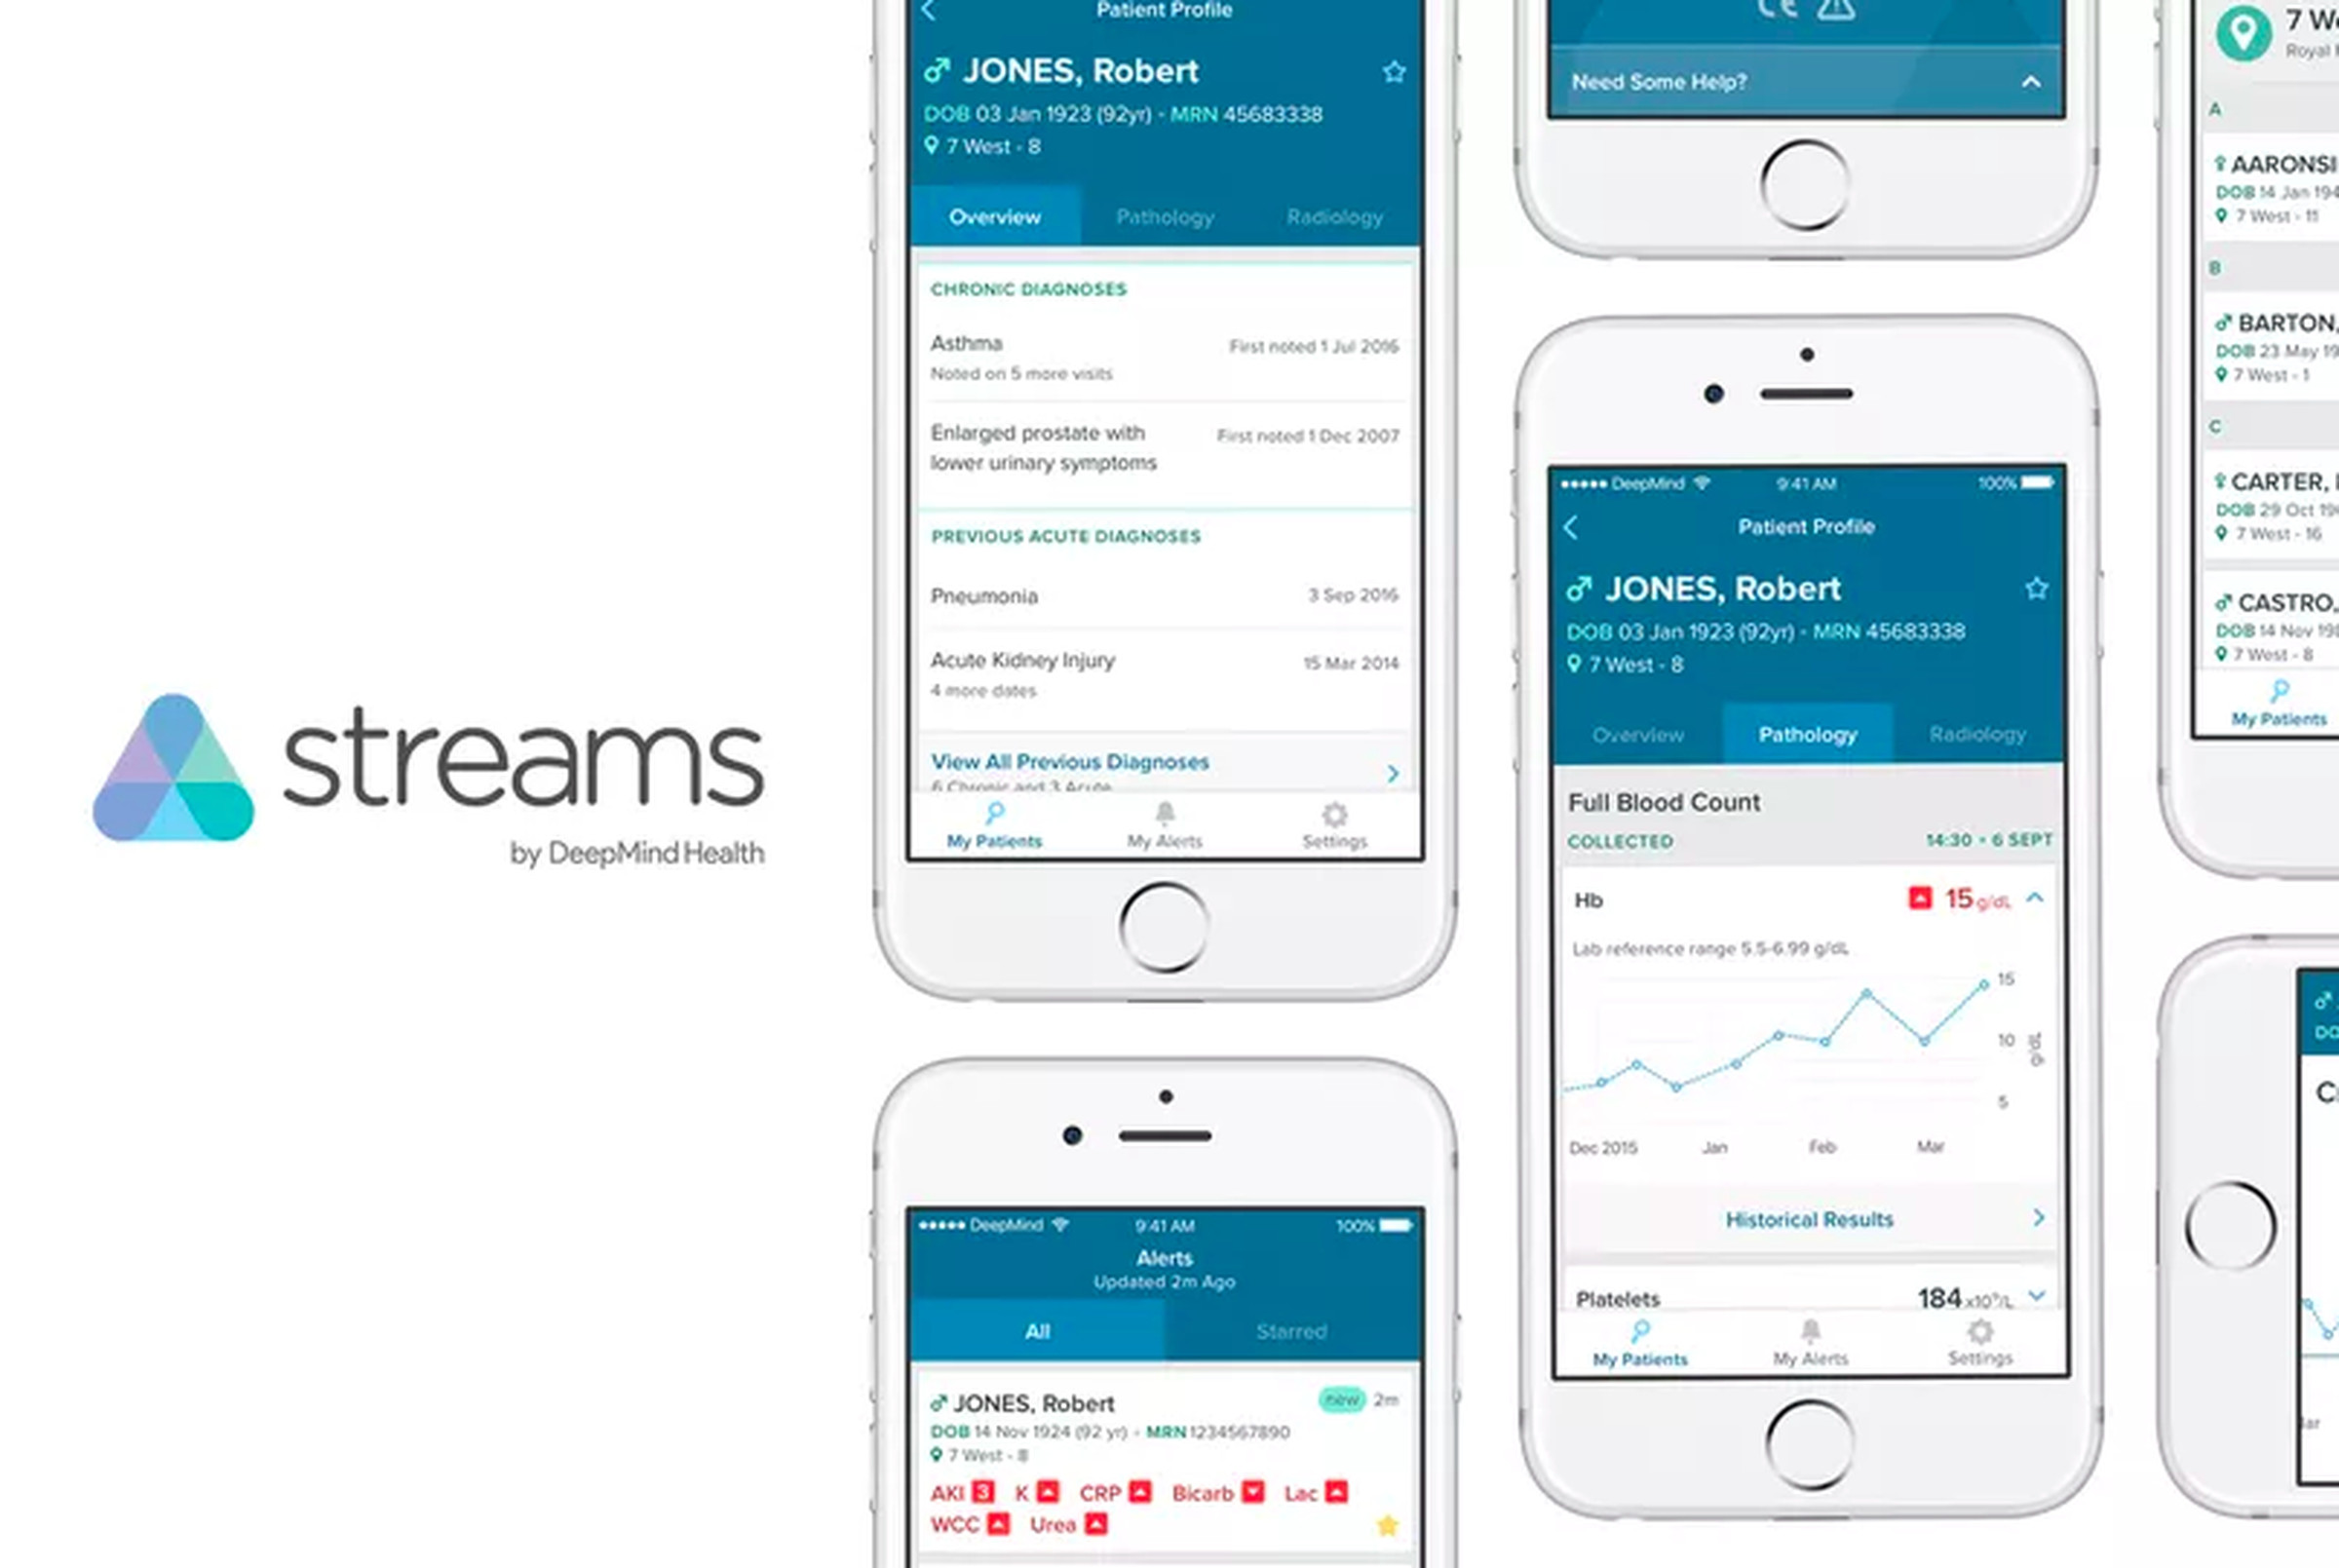 Under Suleyman’s leadership, DeepMind’s health team developed its Streams app — an assistant for doctors and nurses.